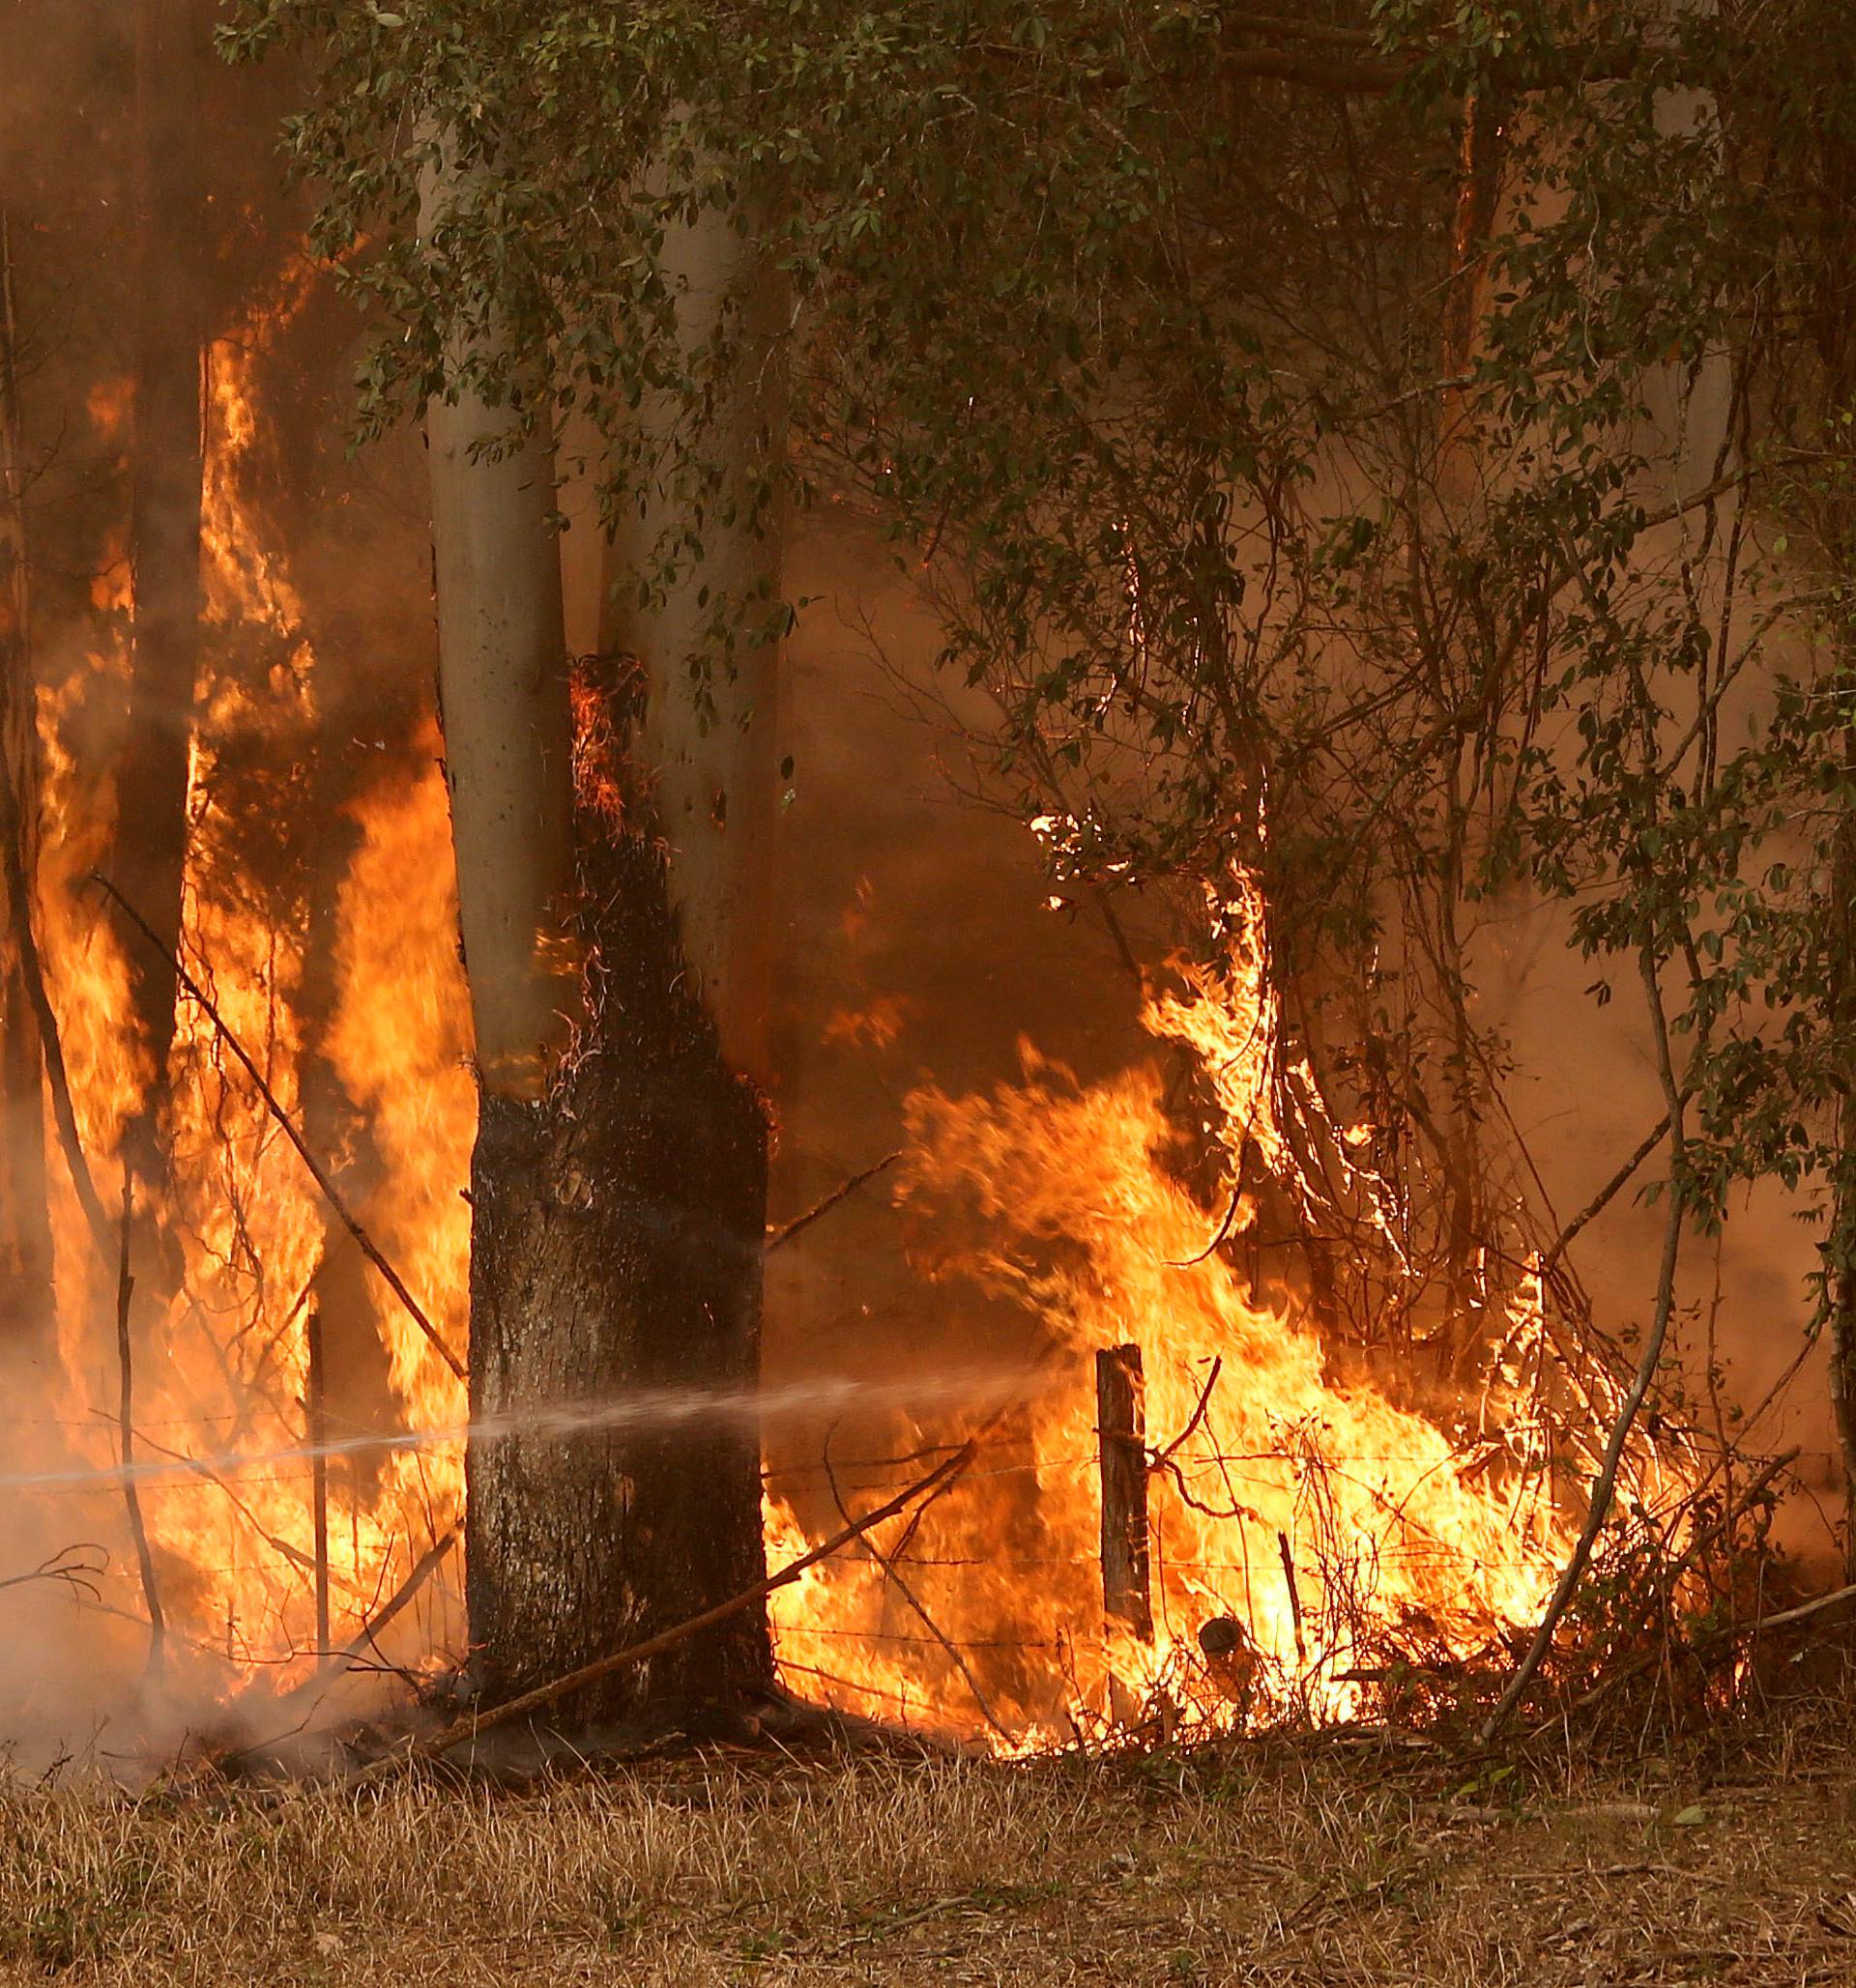 A Tuncurry fire crew member fights part of the Hillville bushfire south of Taree